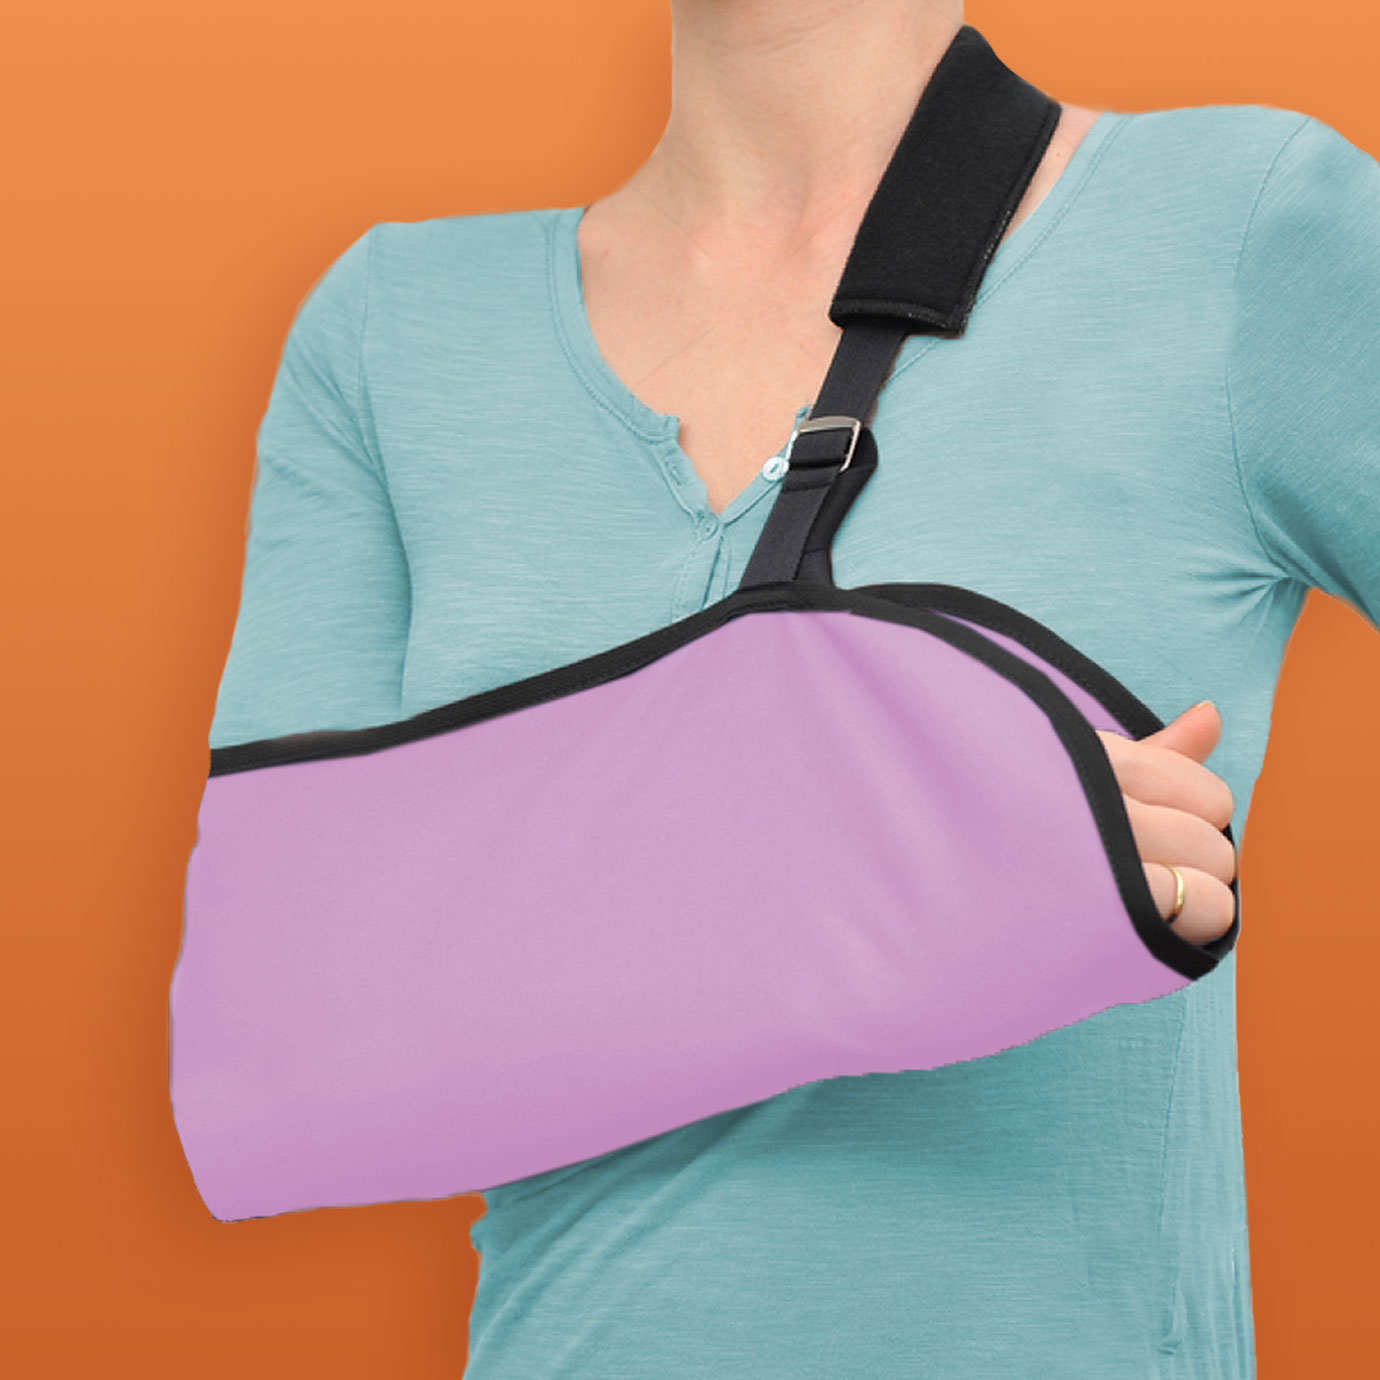 5 Things to Do to Support Your Injury Claim